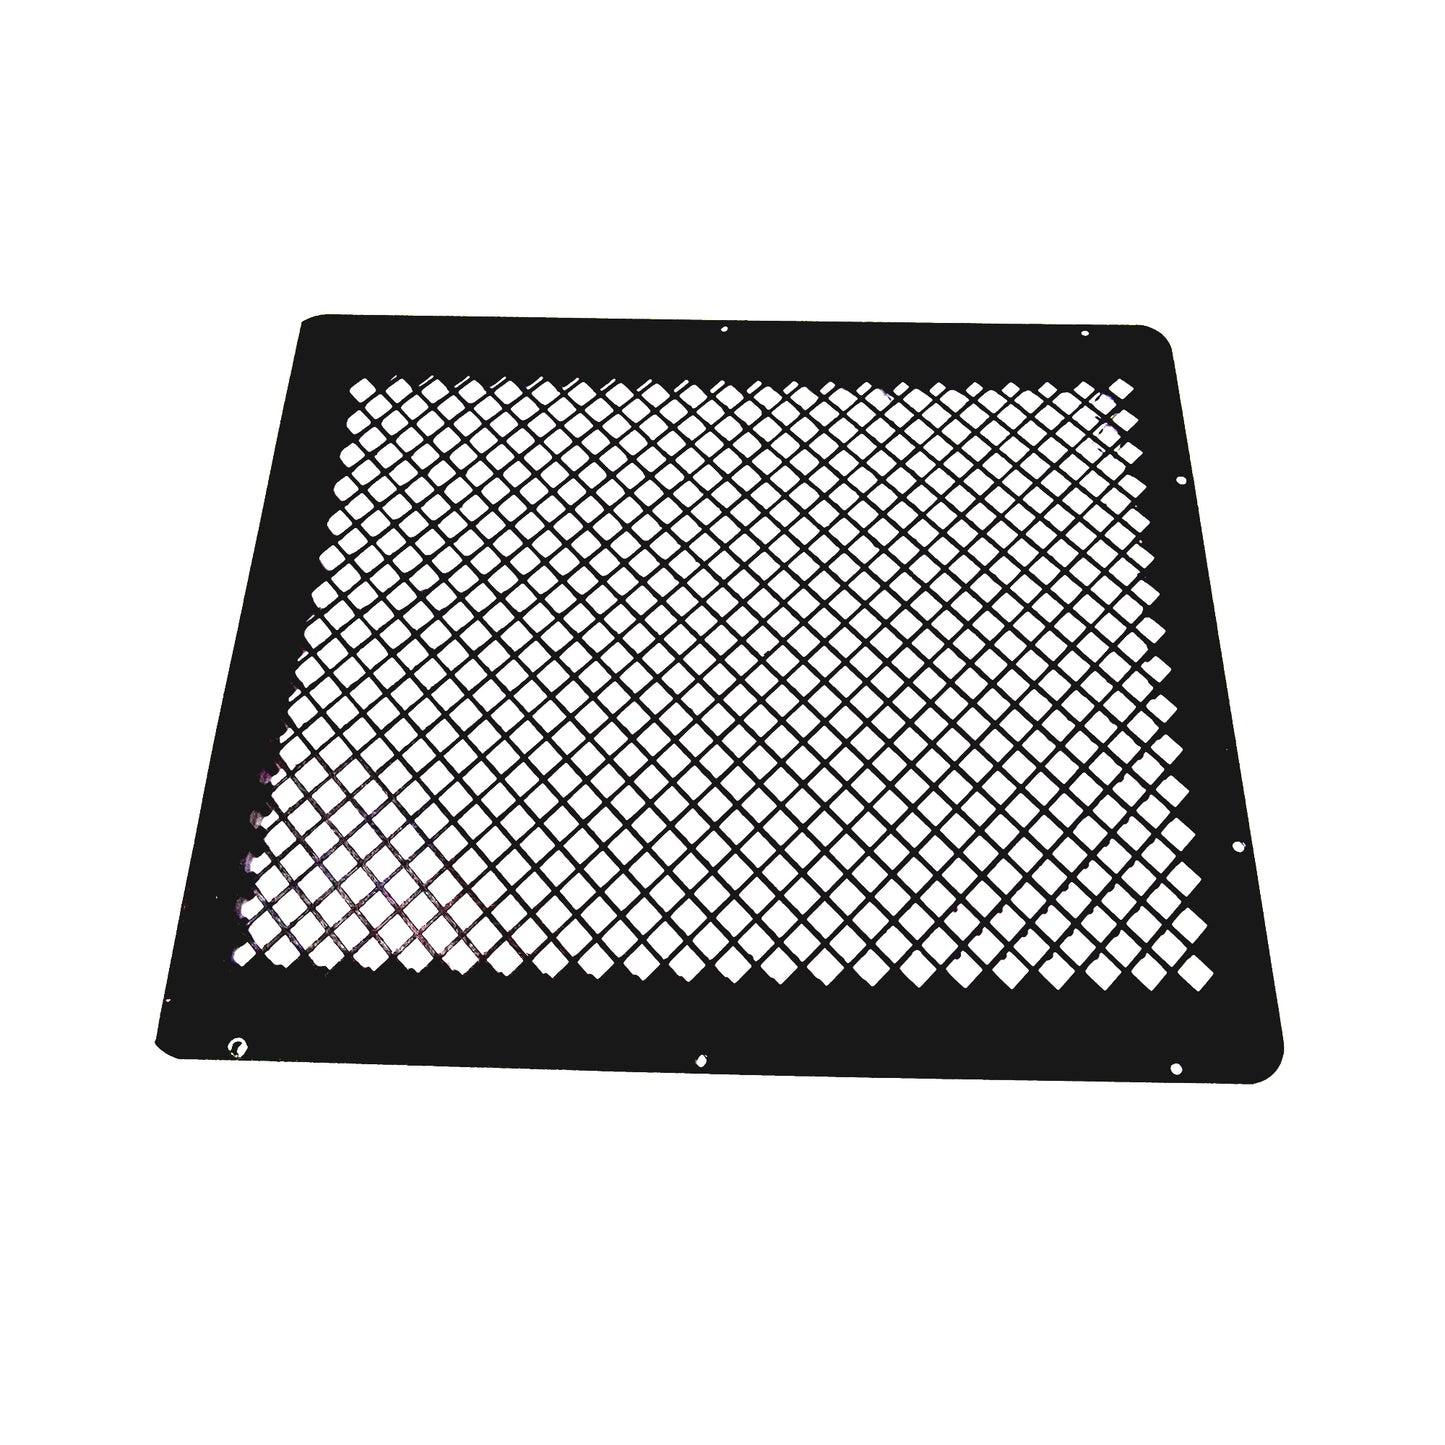 Air Inlet Grille for XD-125 Dehumidifier